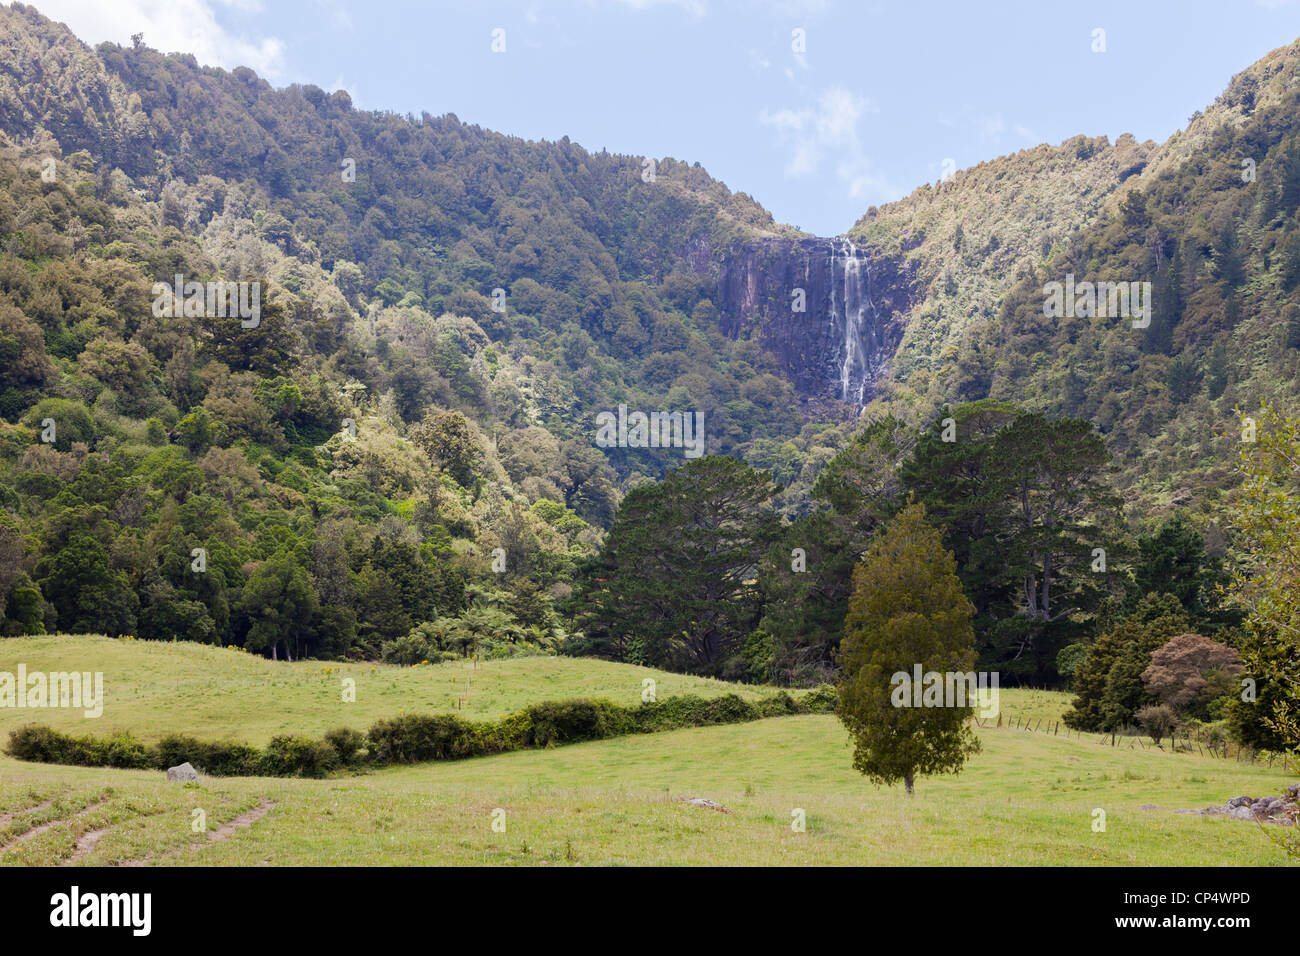 Wairere Falls waterfall and surrounding forest in Wairere Falls Scenic Reserve, Gordon, Waikato, New Zealand, Oceania Stock Photo